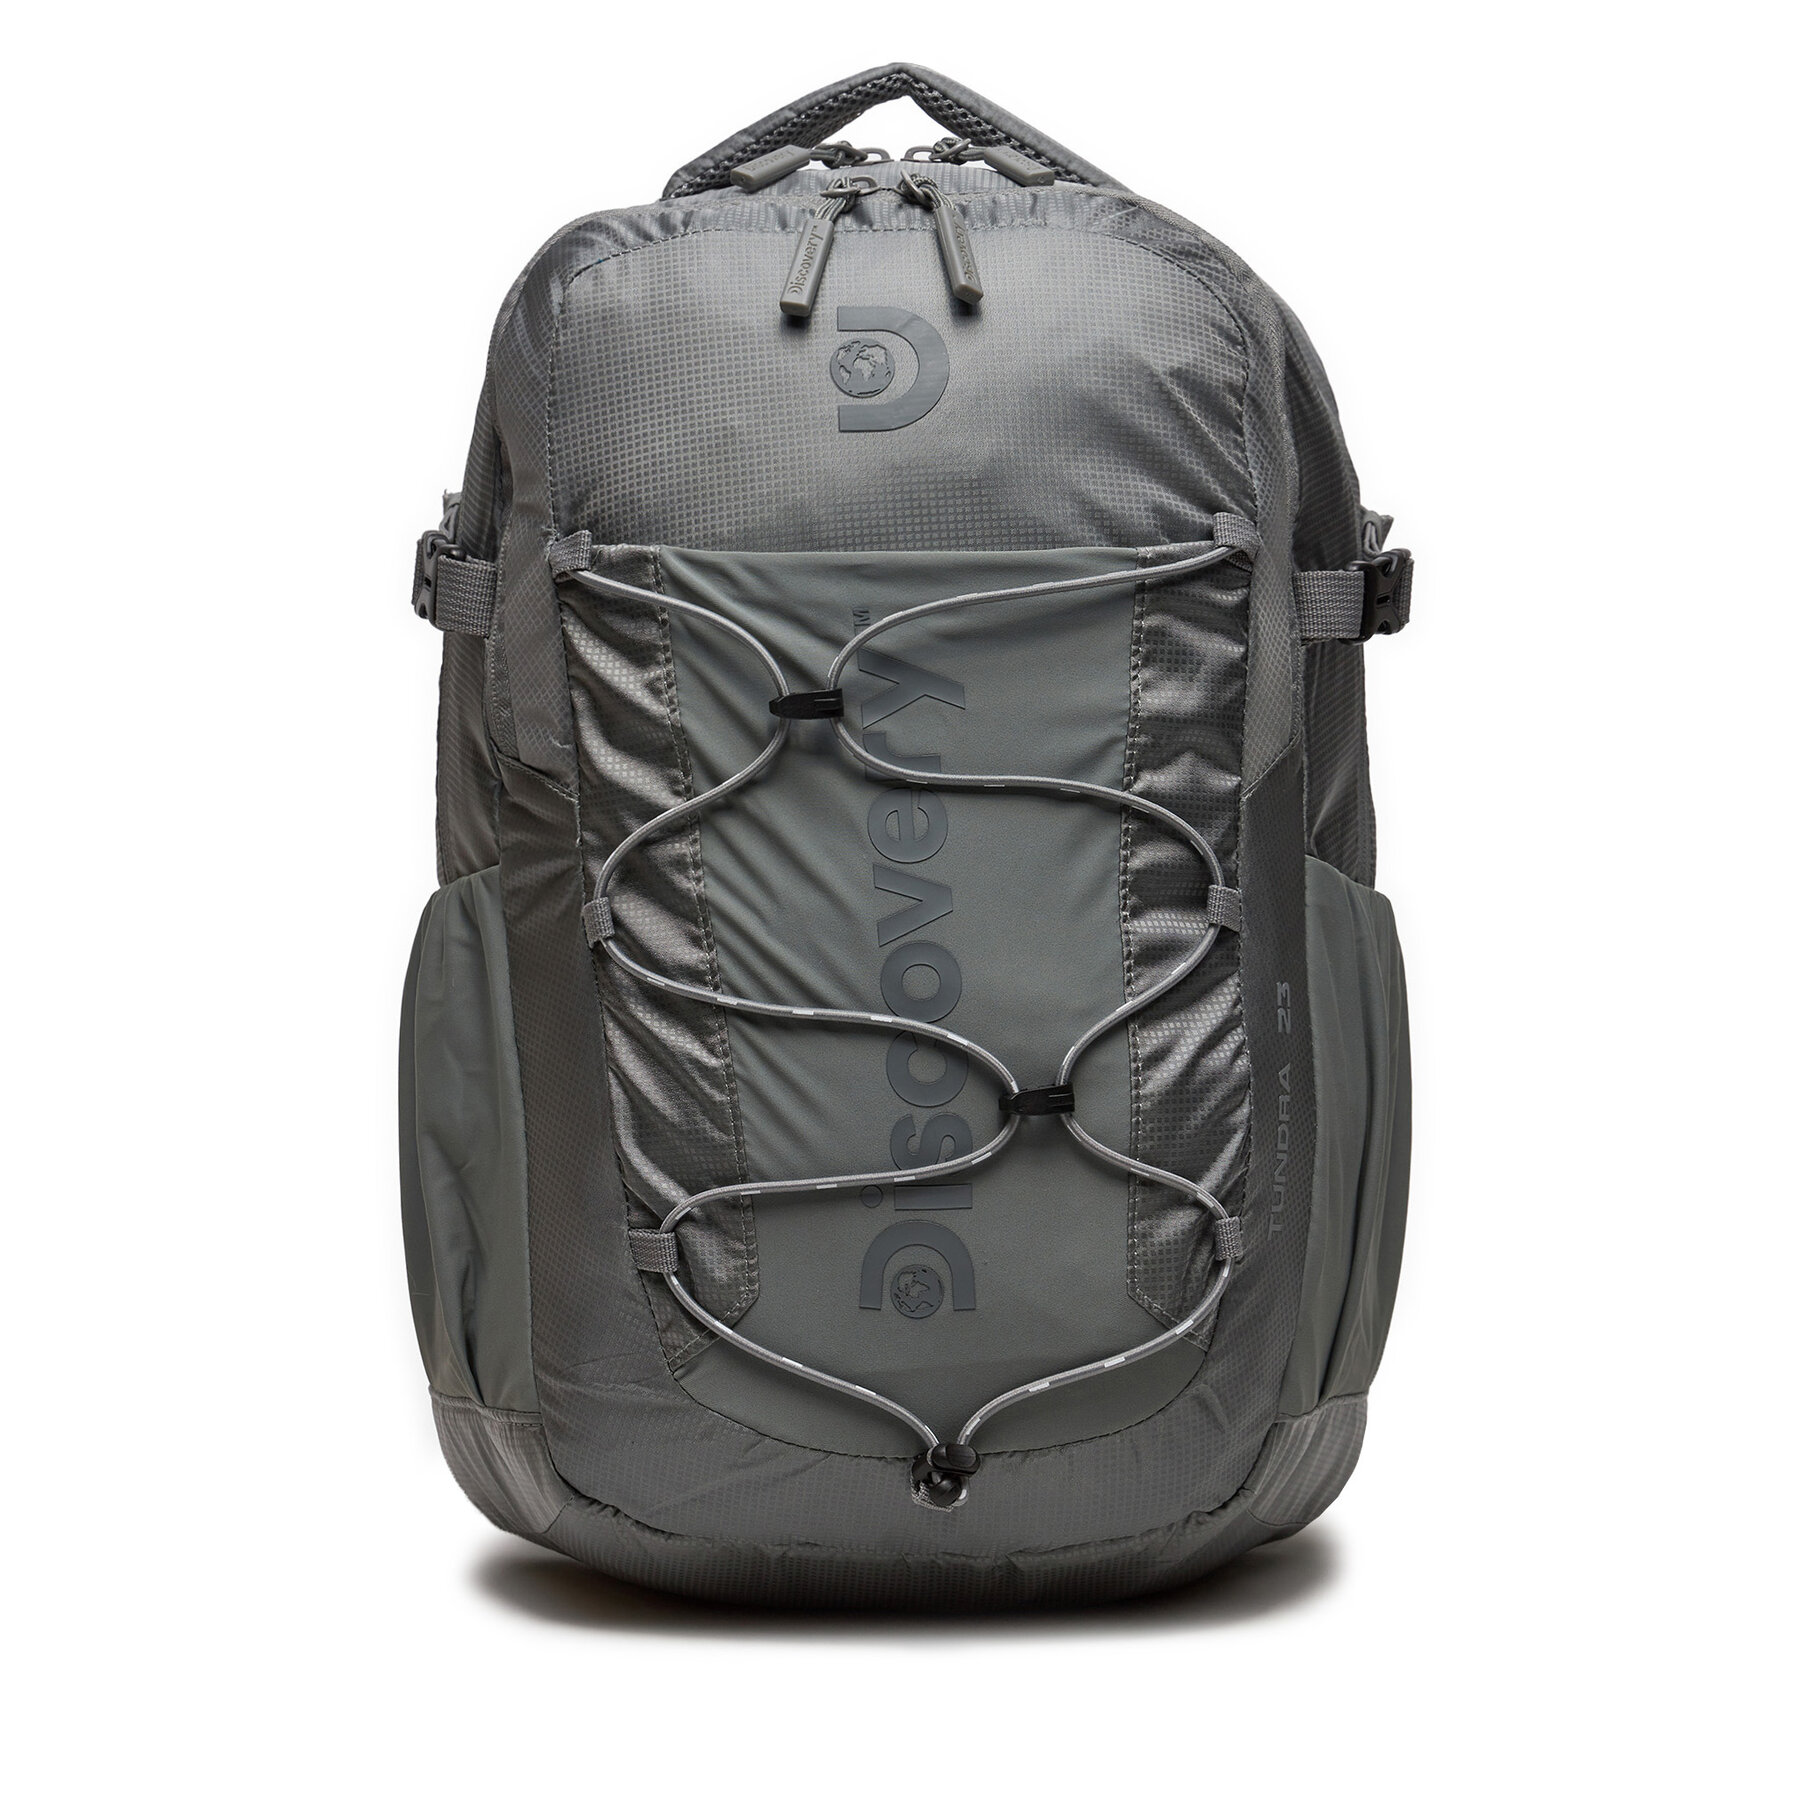 Rucksack Discovery Tundra23 D00612.22 Grey von Discovery